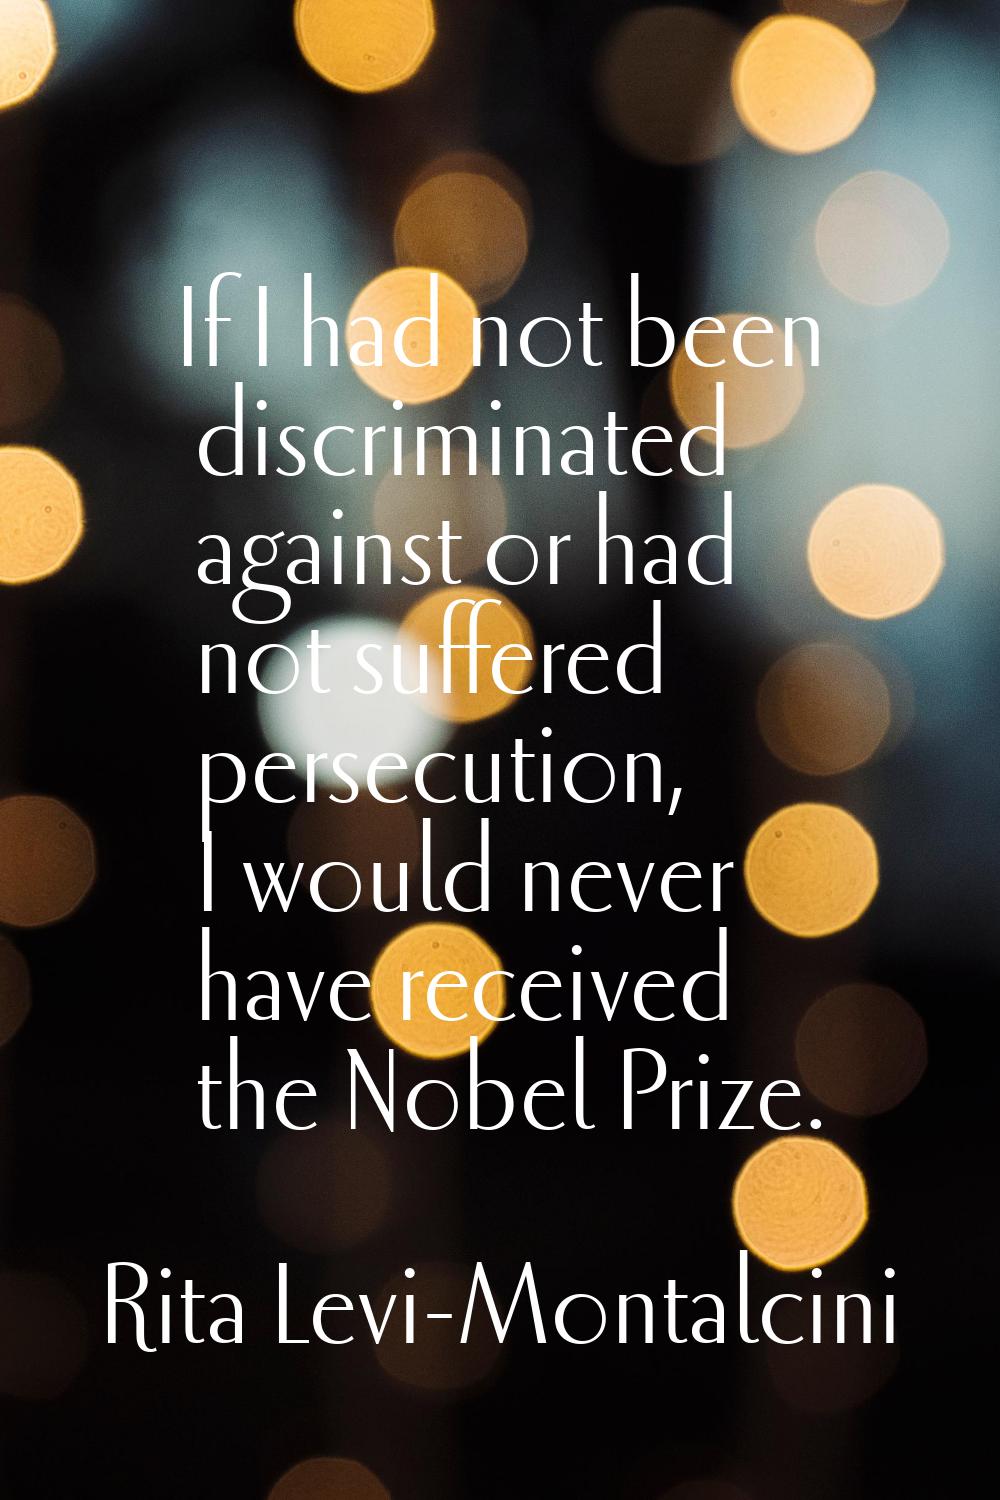 If I had not been discriminated against or had not suffered persecution, I would never have receive